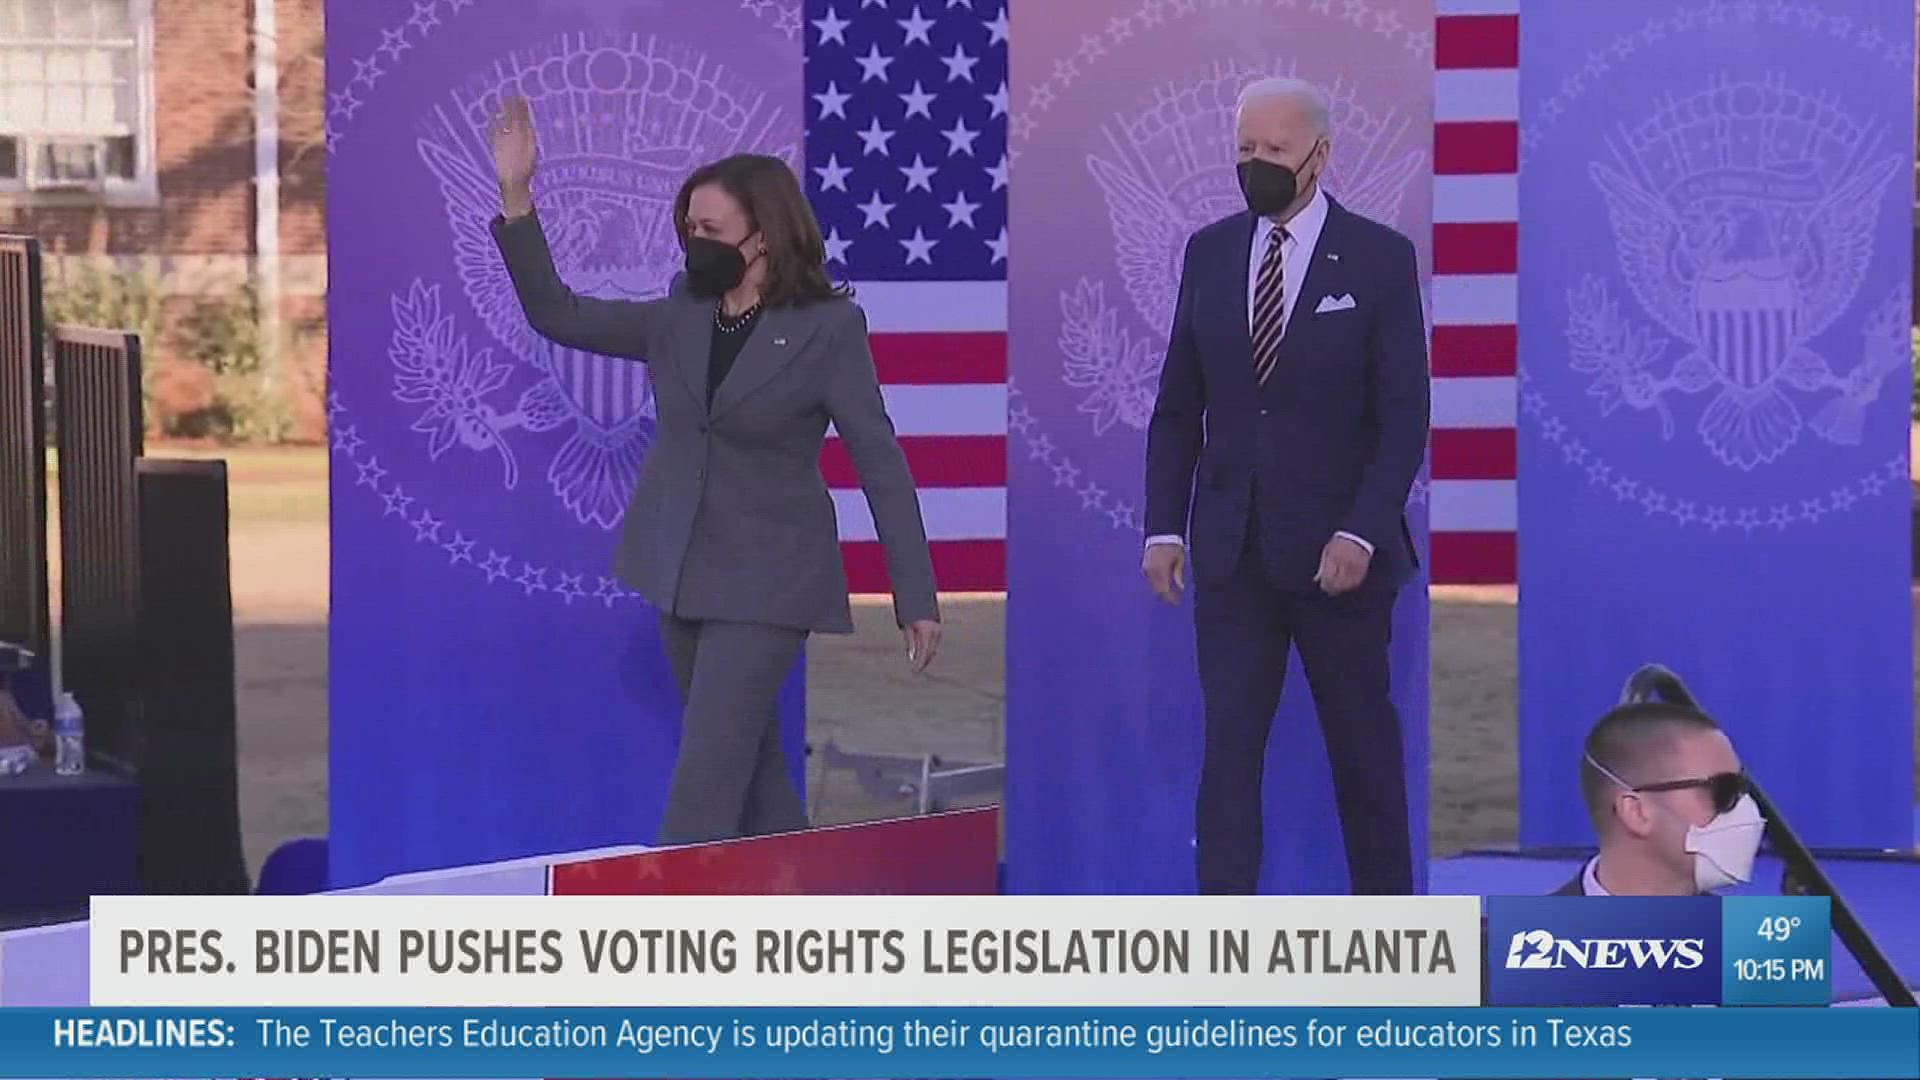 President Biden and Vice President Harris made a stop to push for several "Voting Rights" bills to be passed.